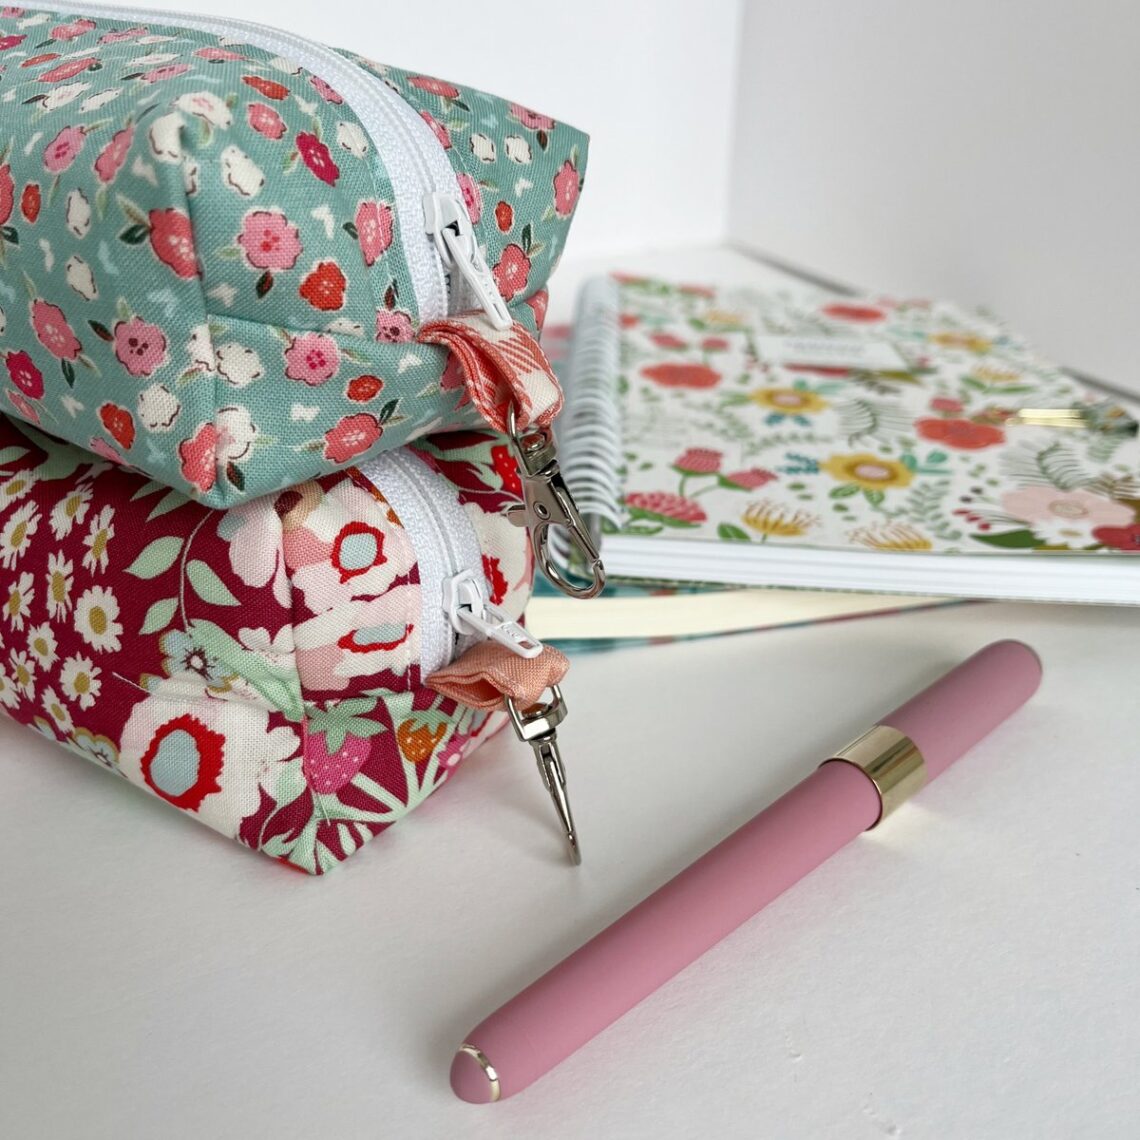 Back To School Pencil Pouch {Sewing Tutorial} – Clover Needlecraft